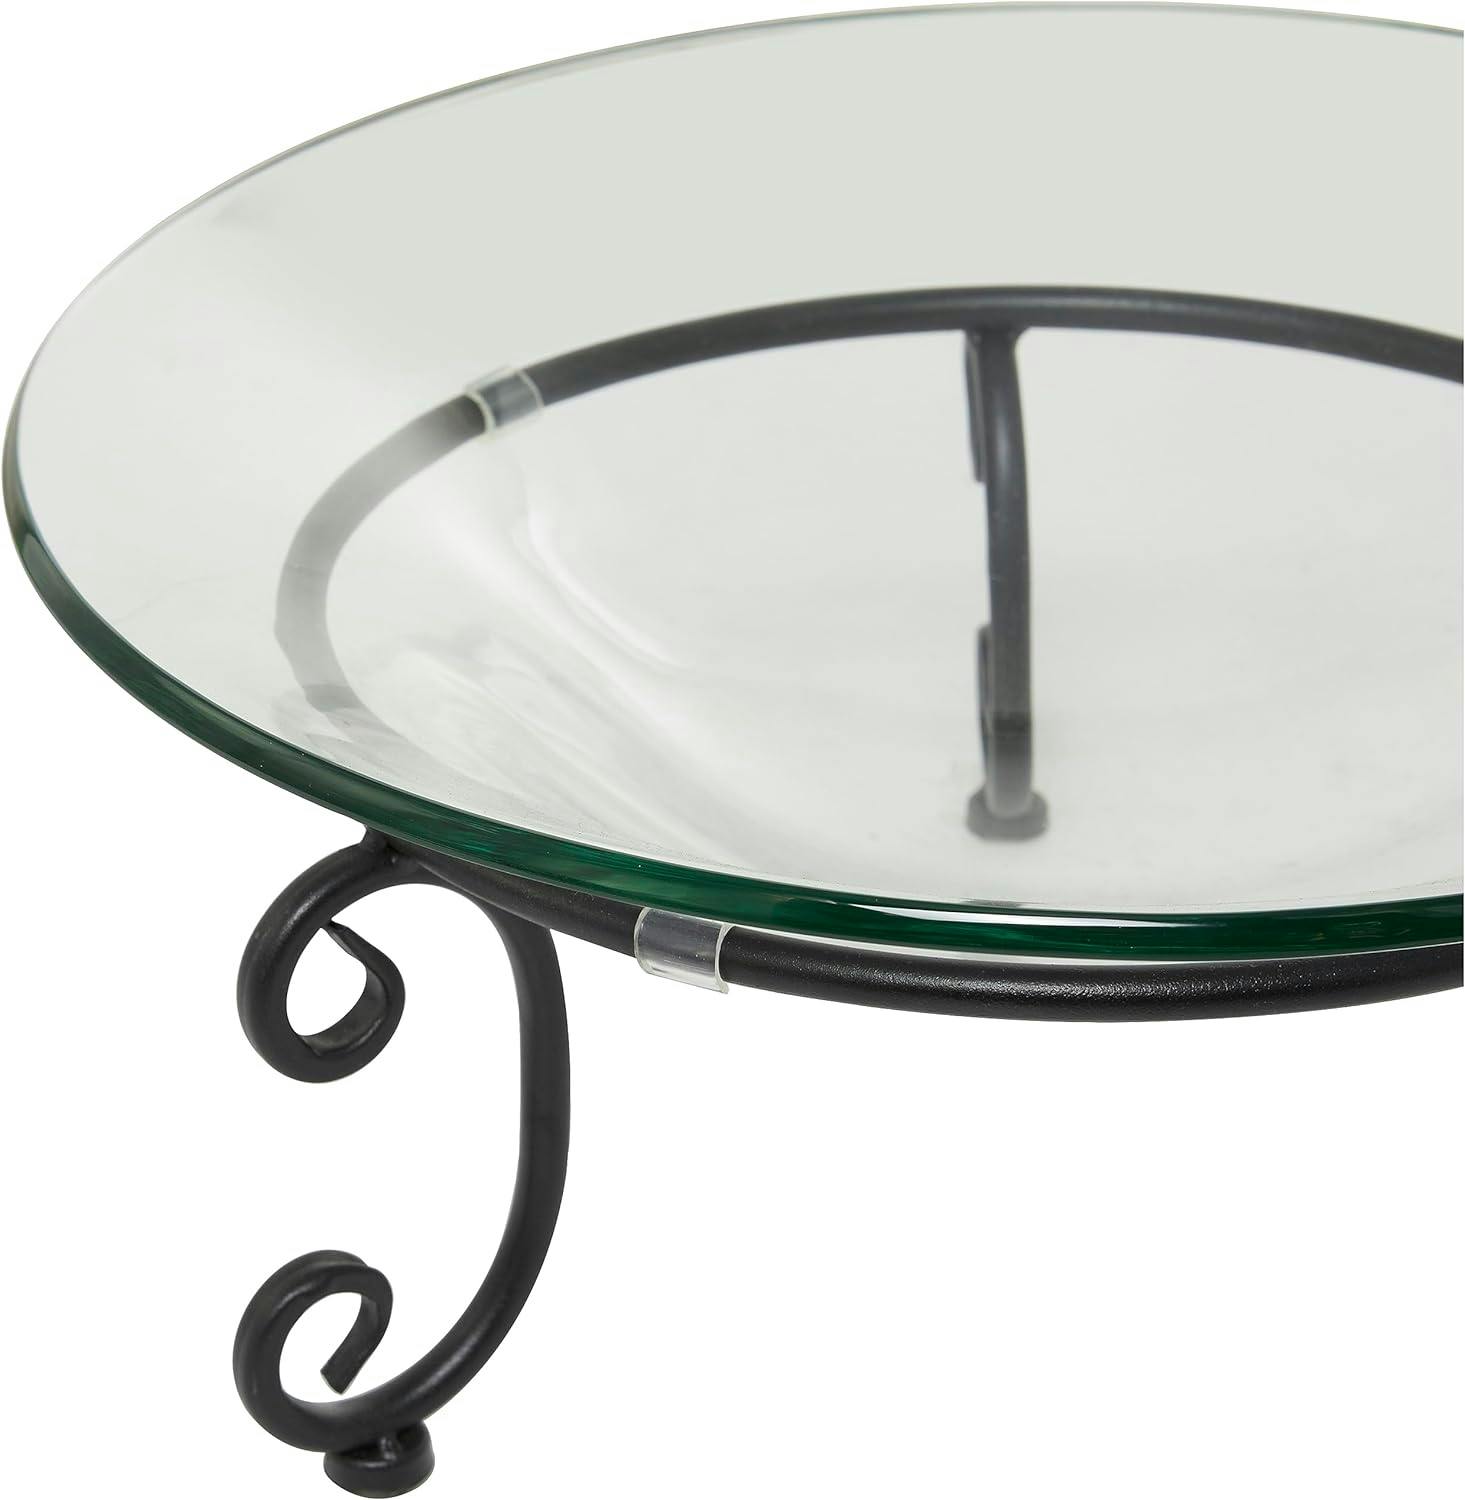 Elegant 17" Round Glass Serving Bowl with Black Scroll Stand